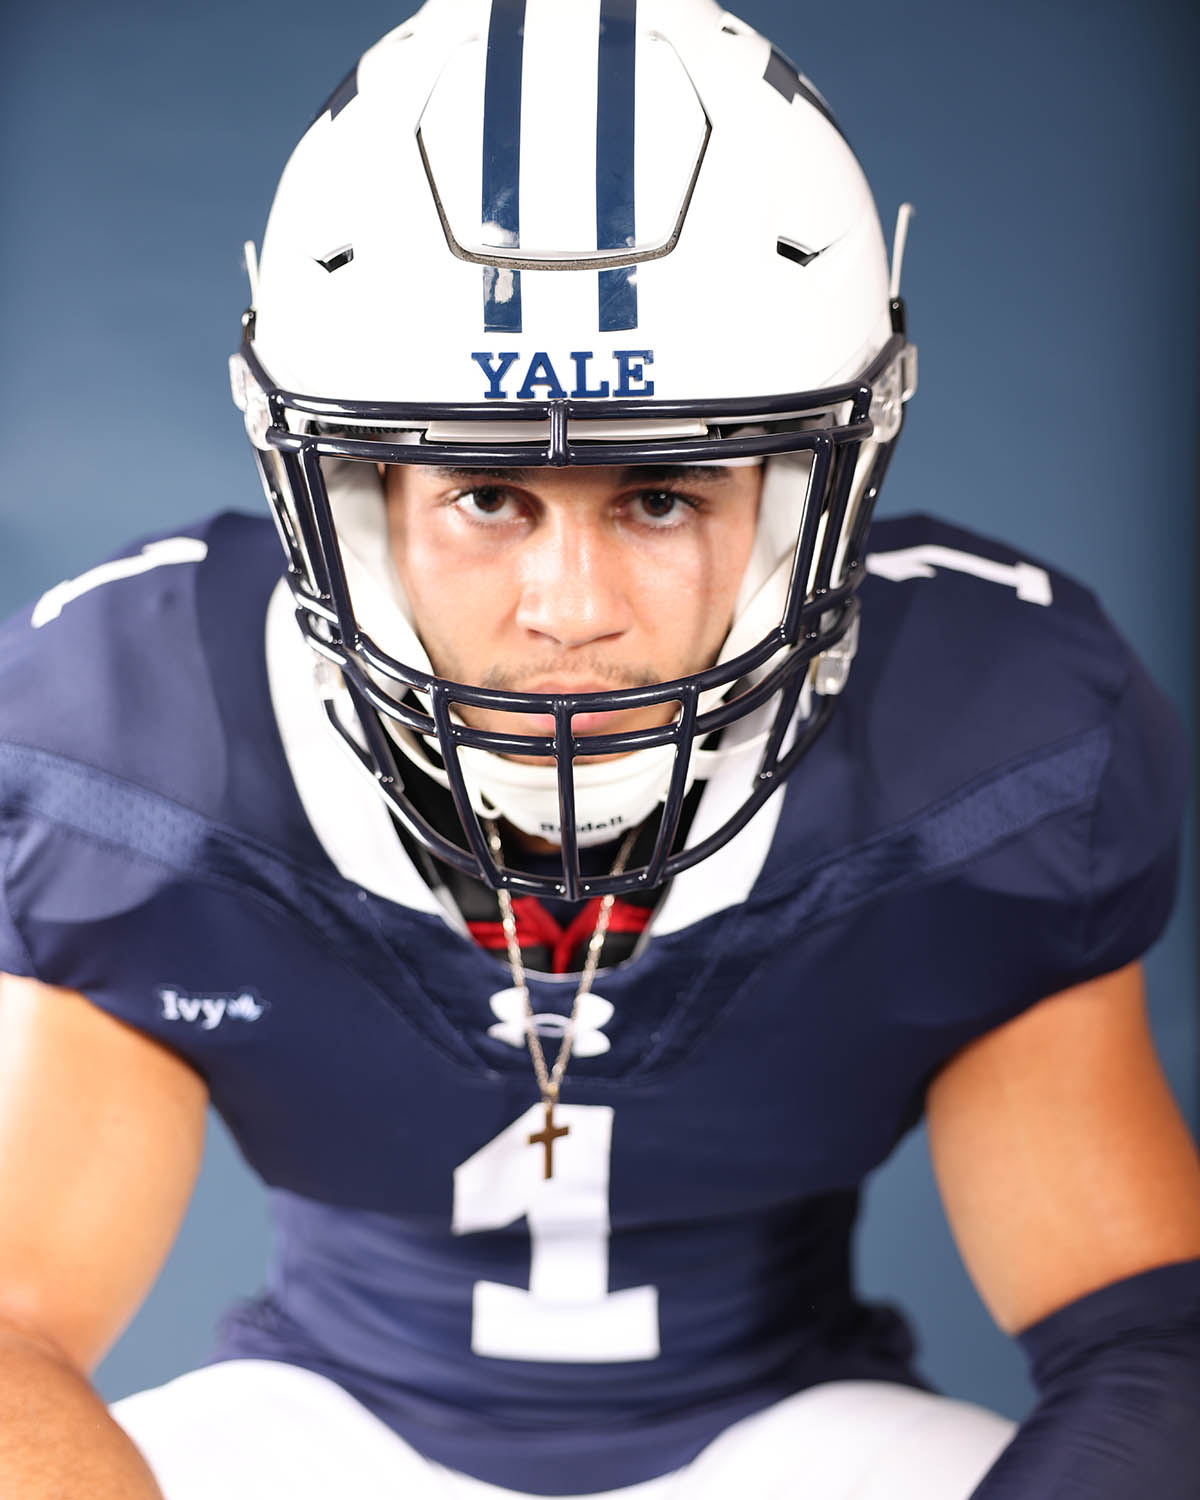 Yale Football on X: "🚨 TOUCHDOWN YALE 🚨 Mason Tipton with TD reception  No. 5⃣ on the season, a 4-yard catch in the corner of the end zone. Yale  24, Dartmouth 17 |